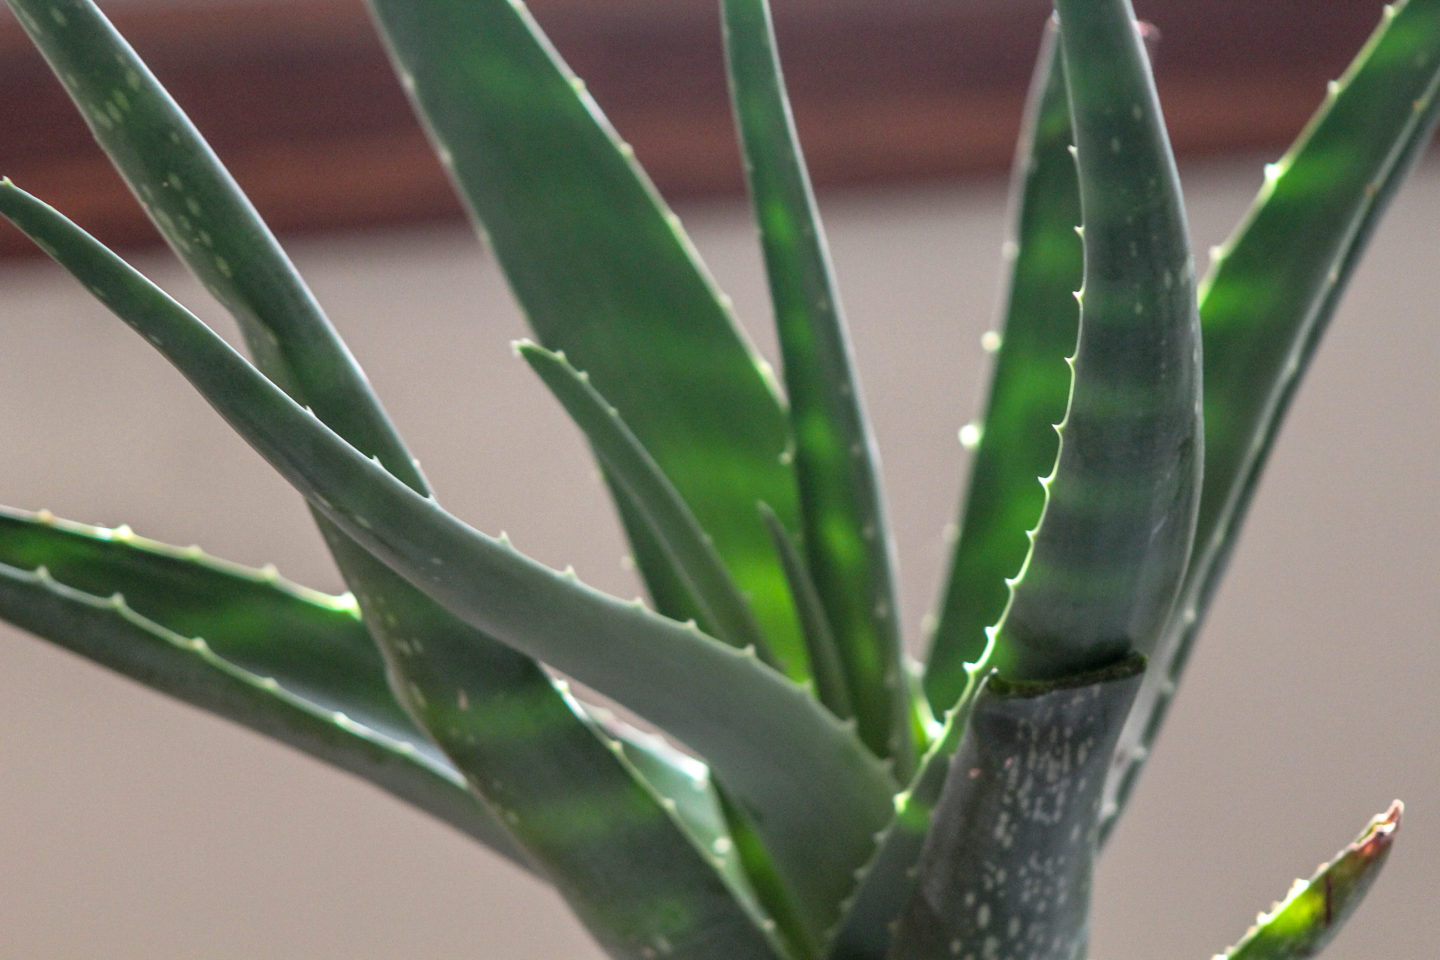 House plants for Beginners: The aloe vera. One of the best houseplants for beginners